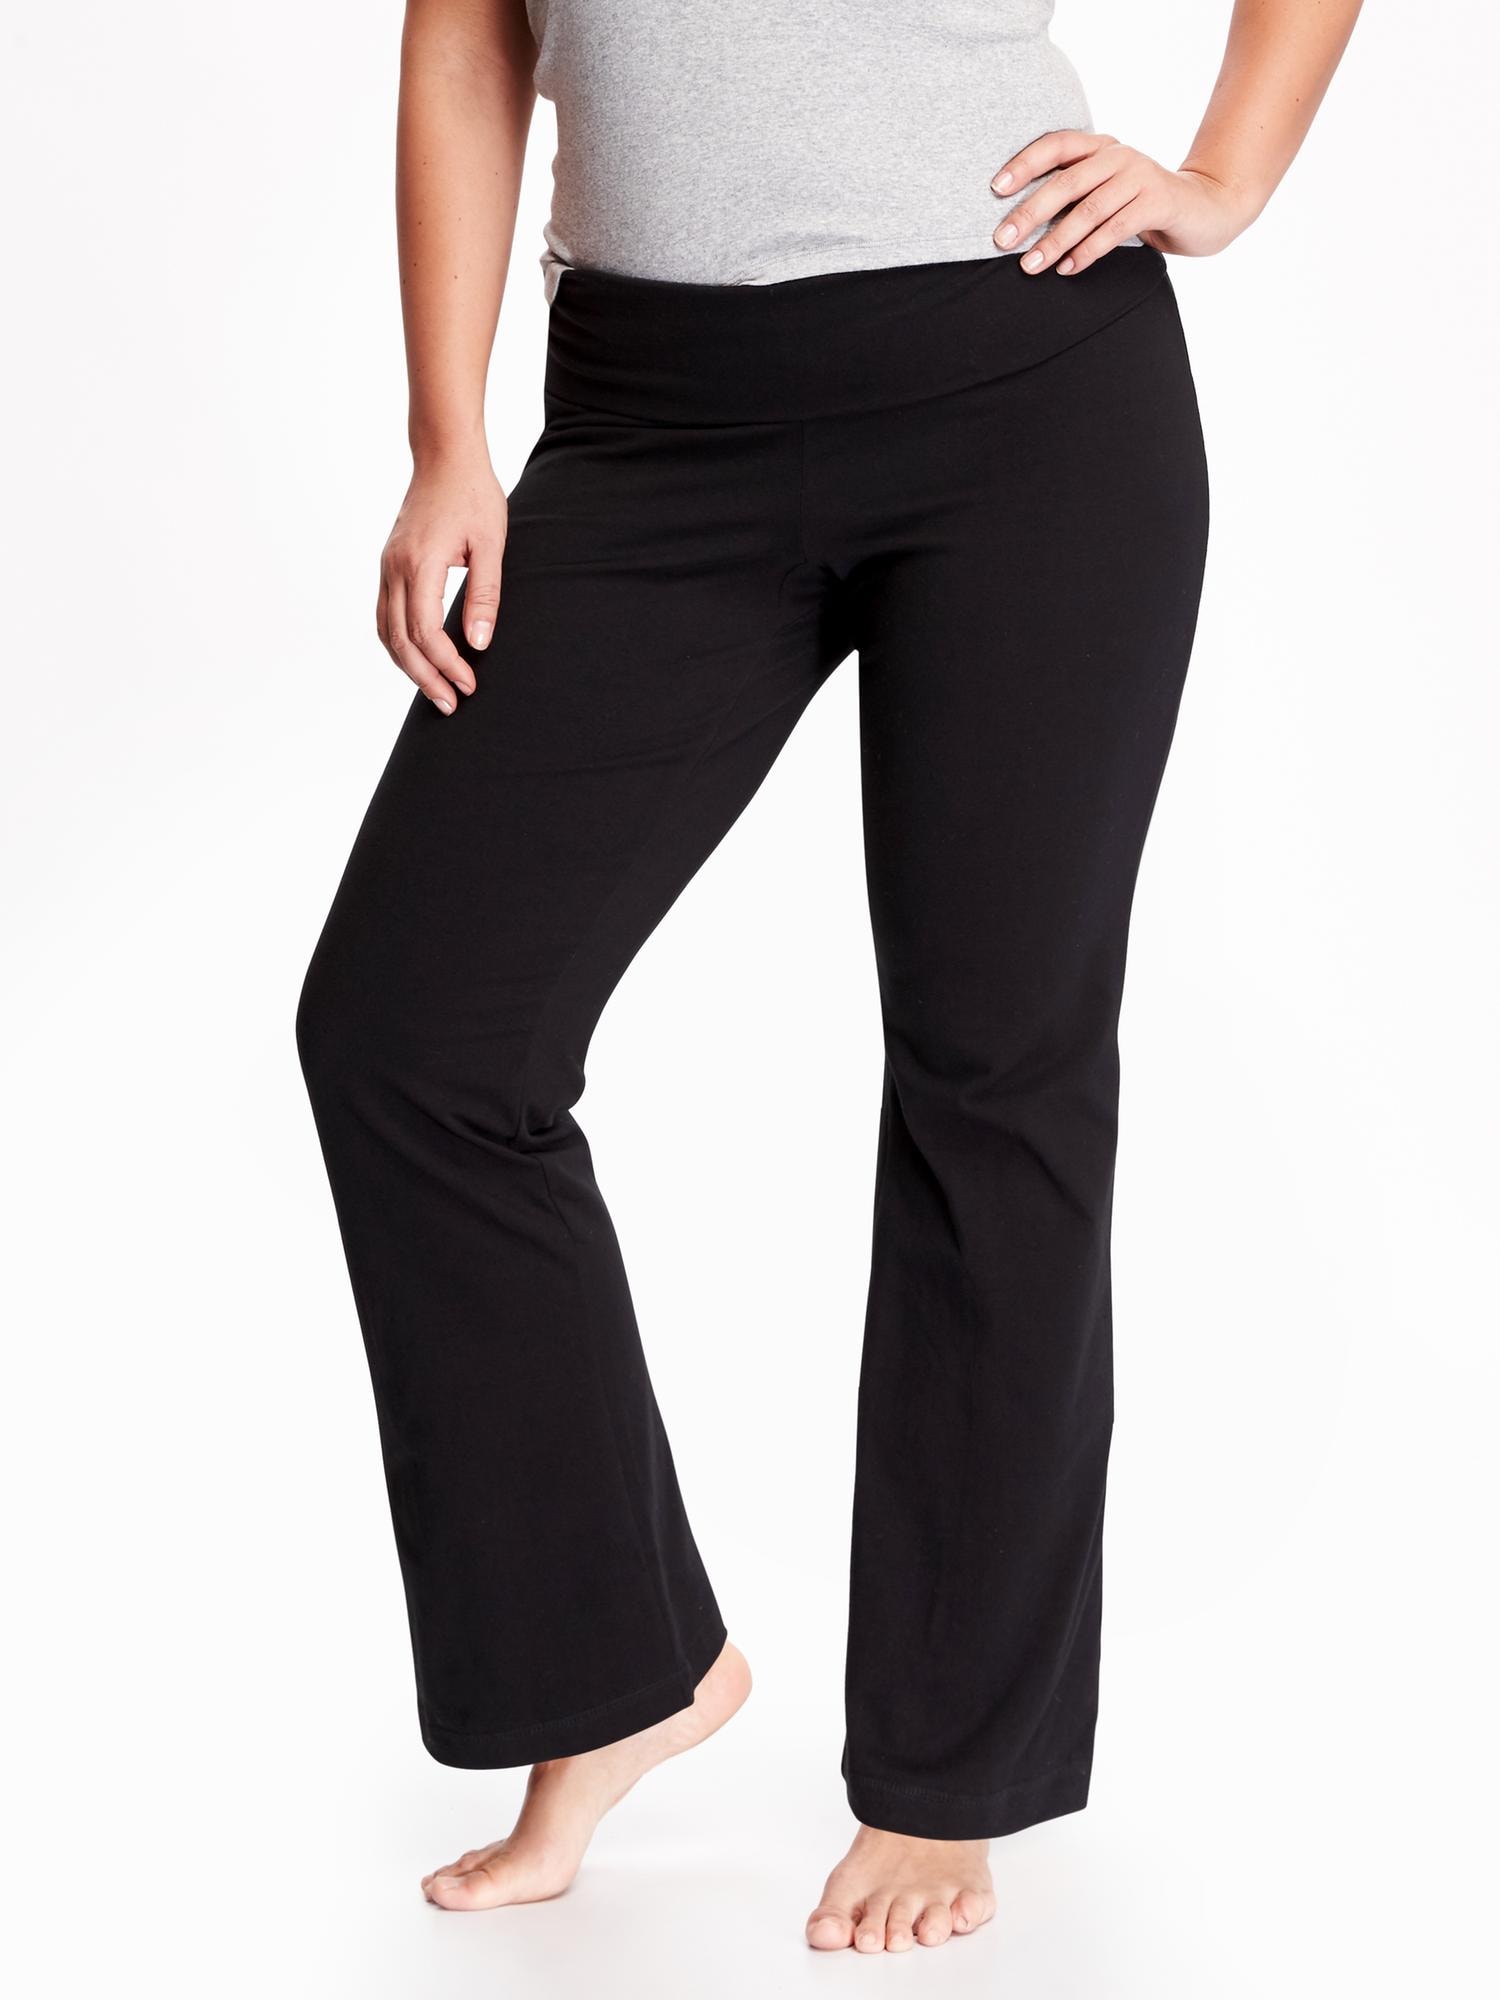 Roll-Over Go-Dry Plus-Size Yoga Pants